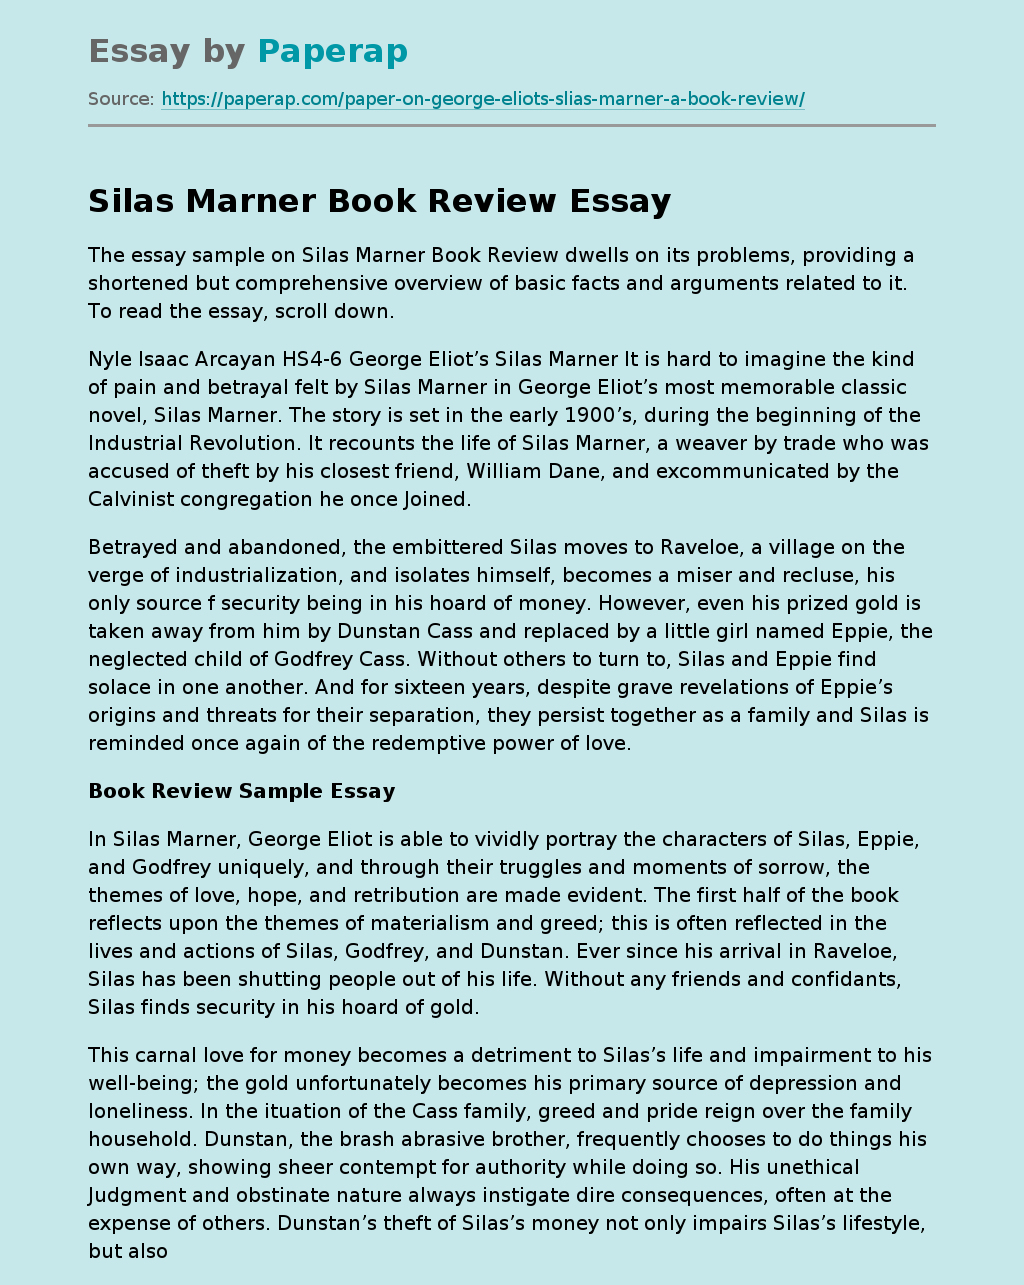 Silas Marner Book Review